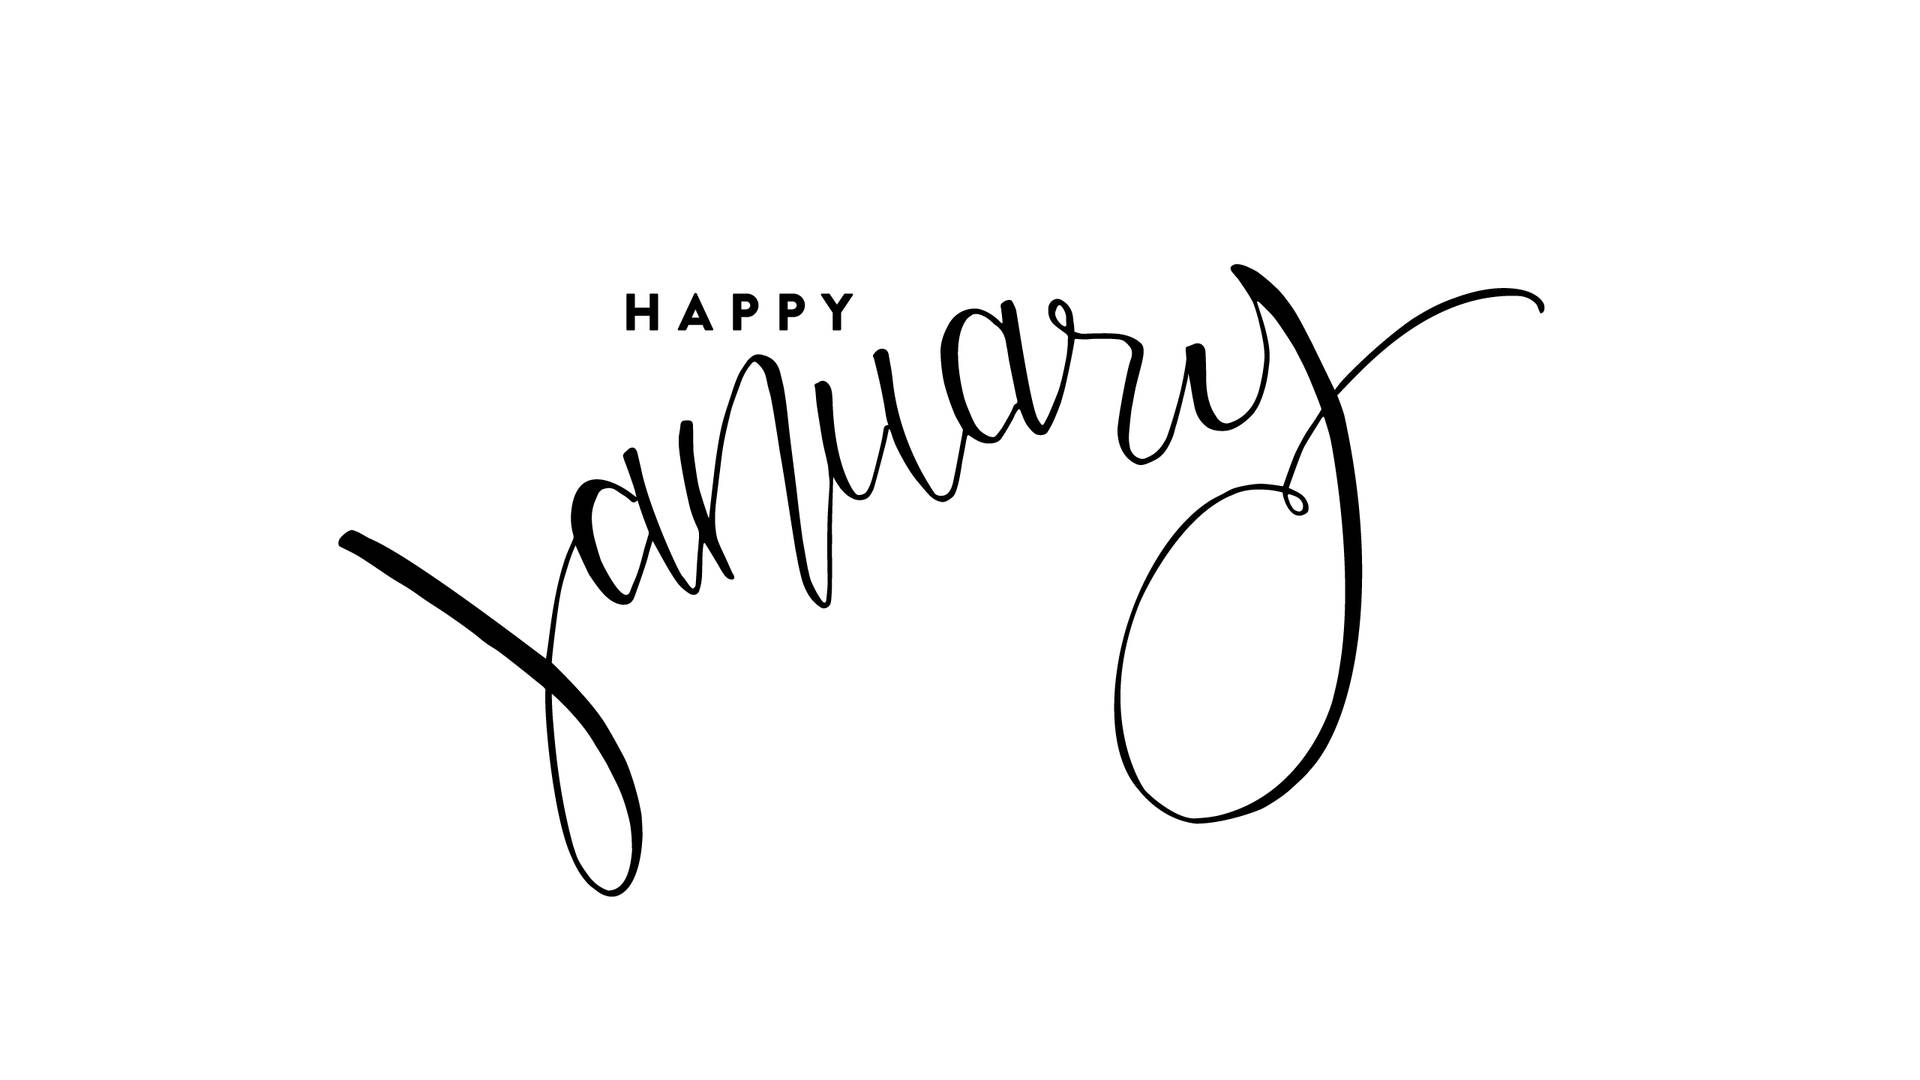 Happy January Calligraphy Background